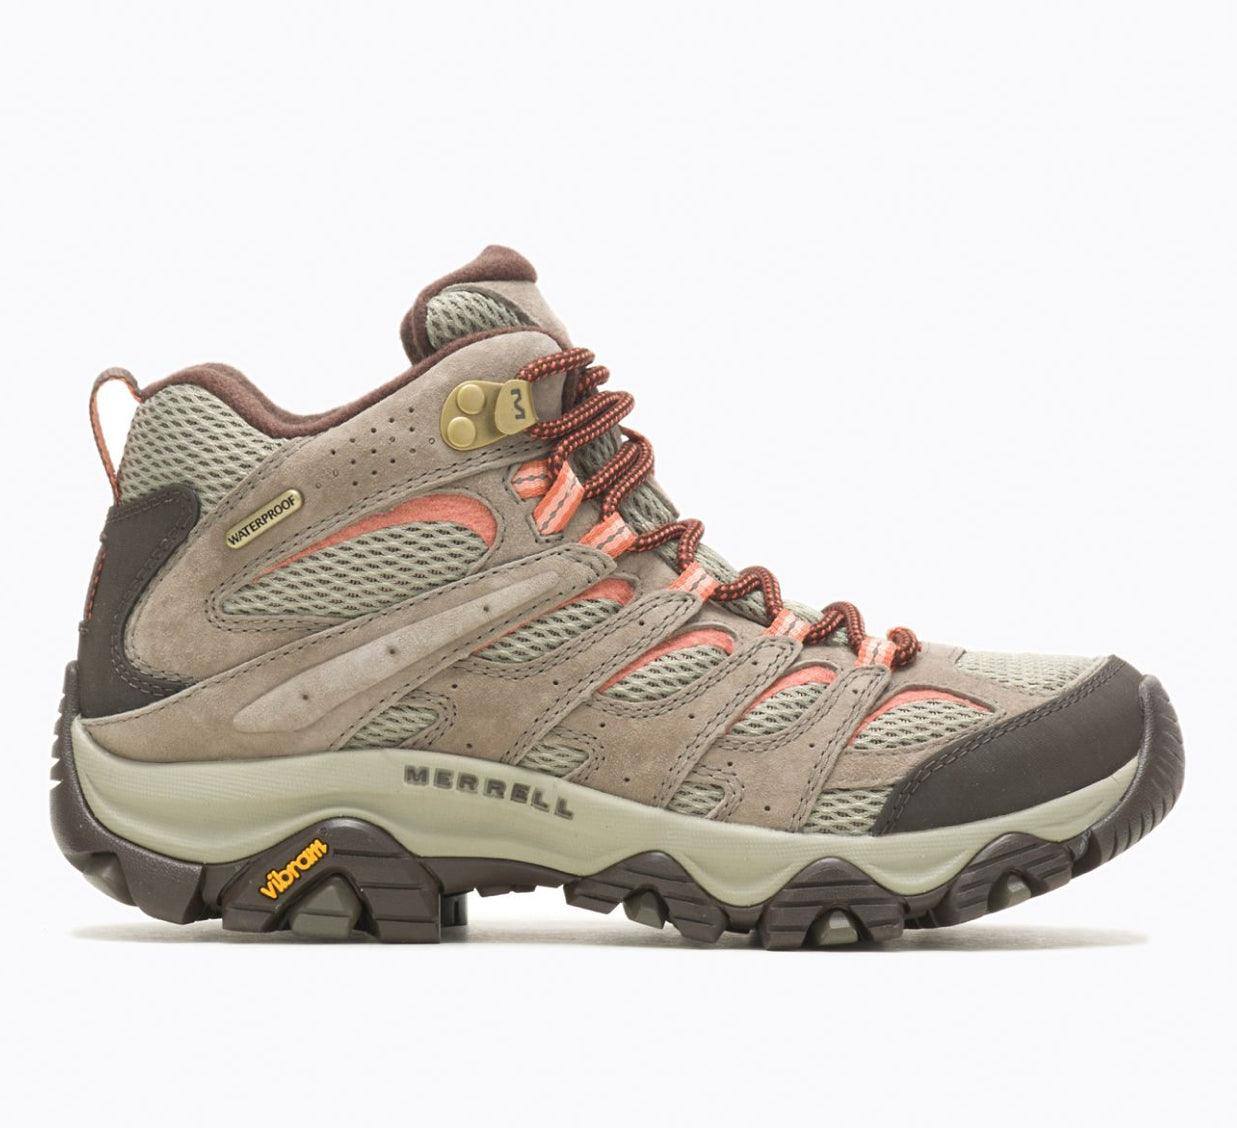 Women’s Moab 3 Mid Waterproof Shoe - The Shoe CollectiveMerrell